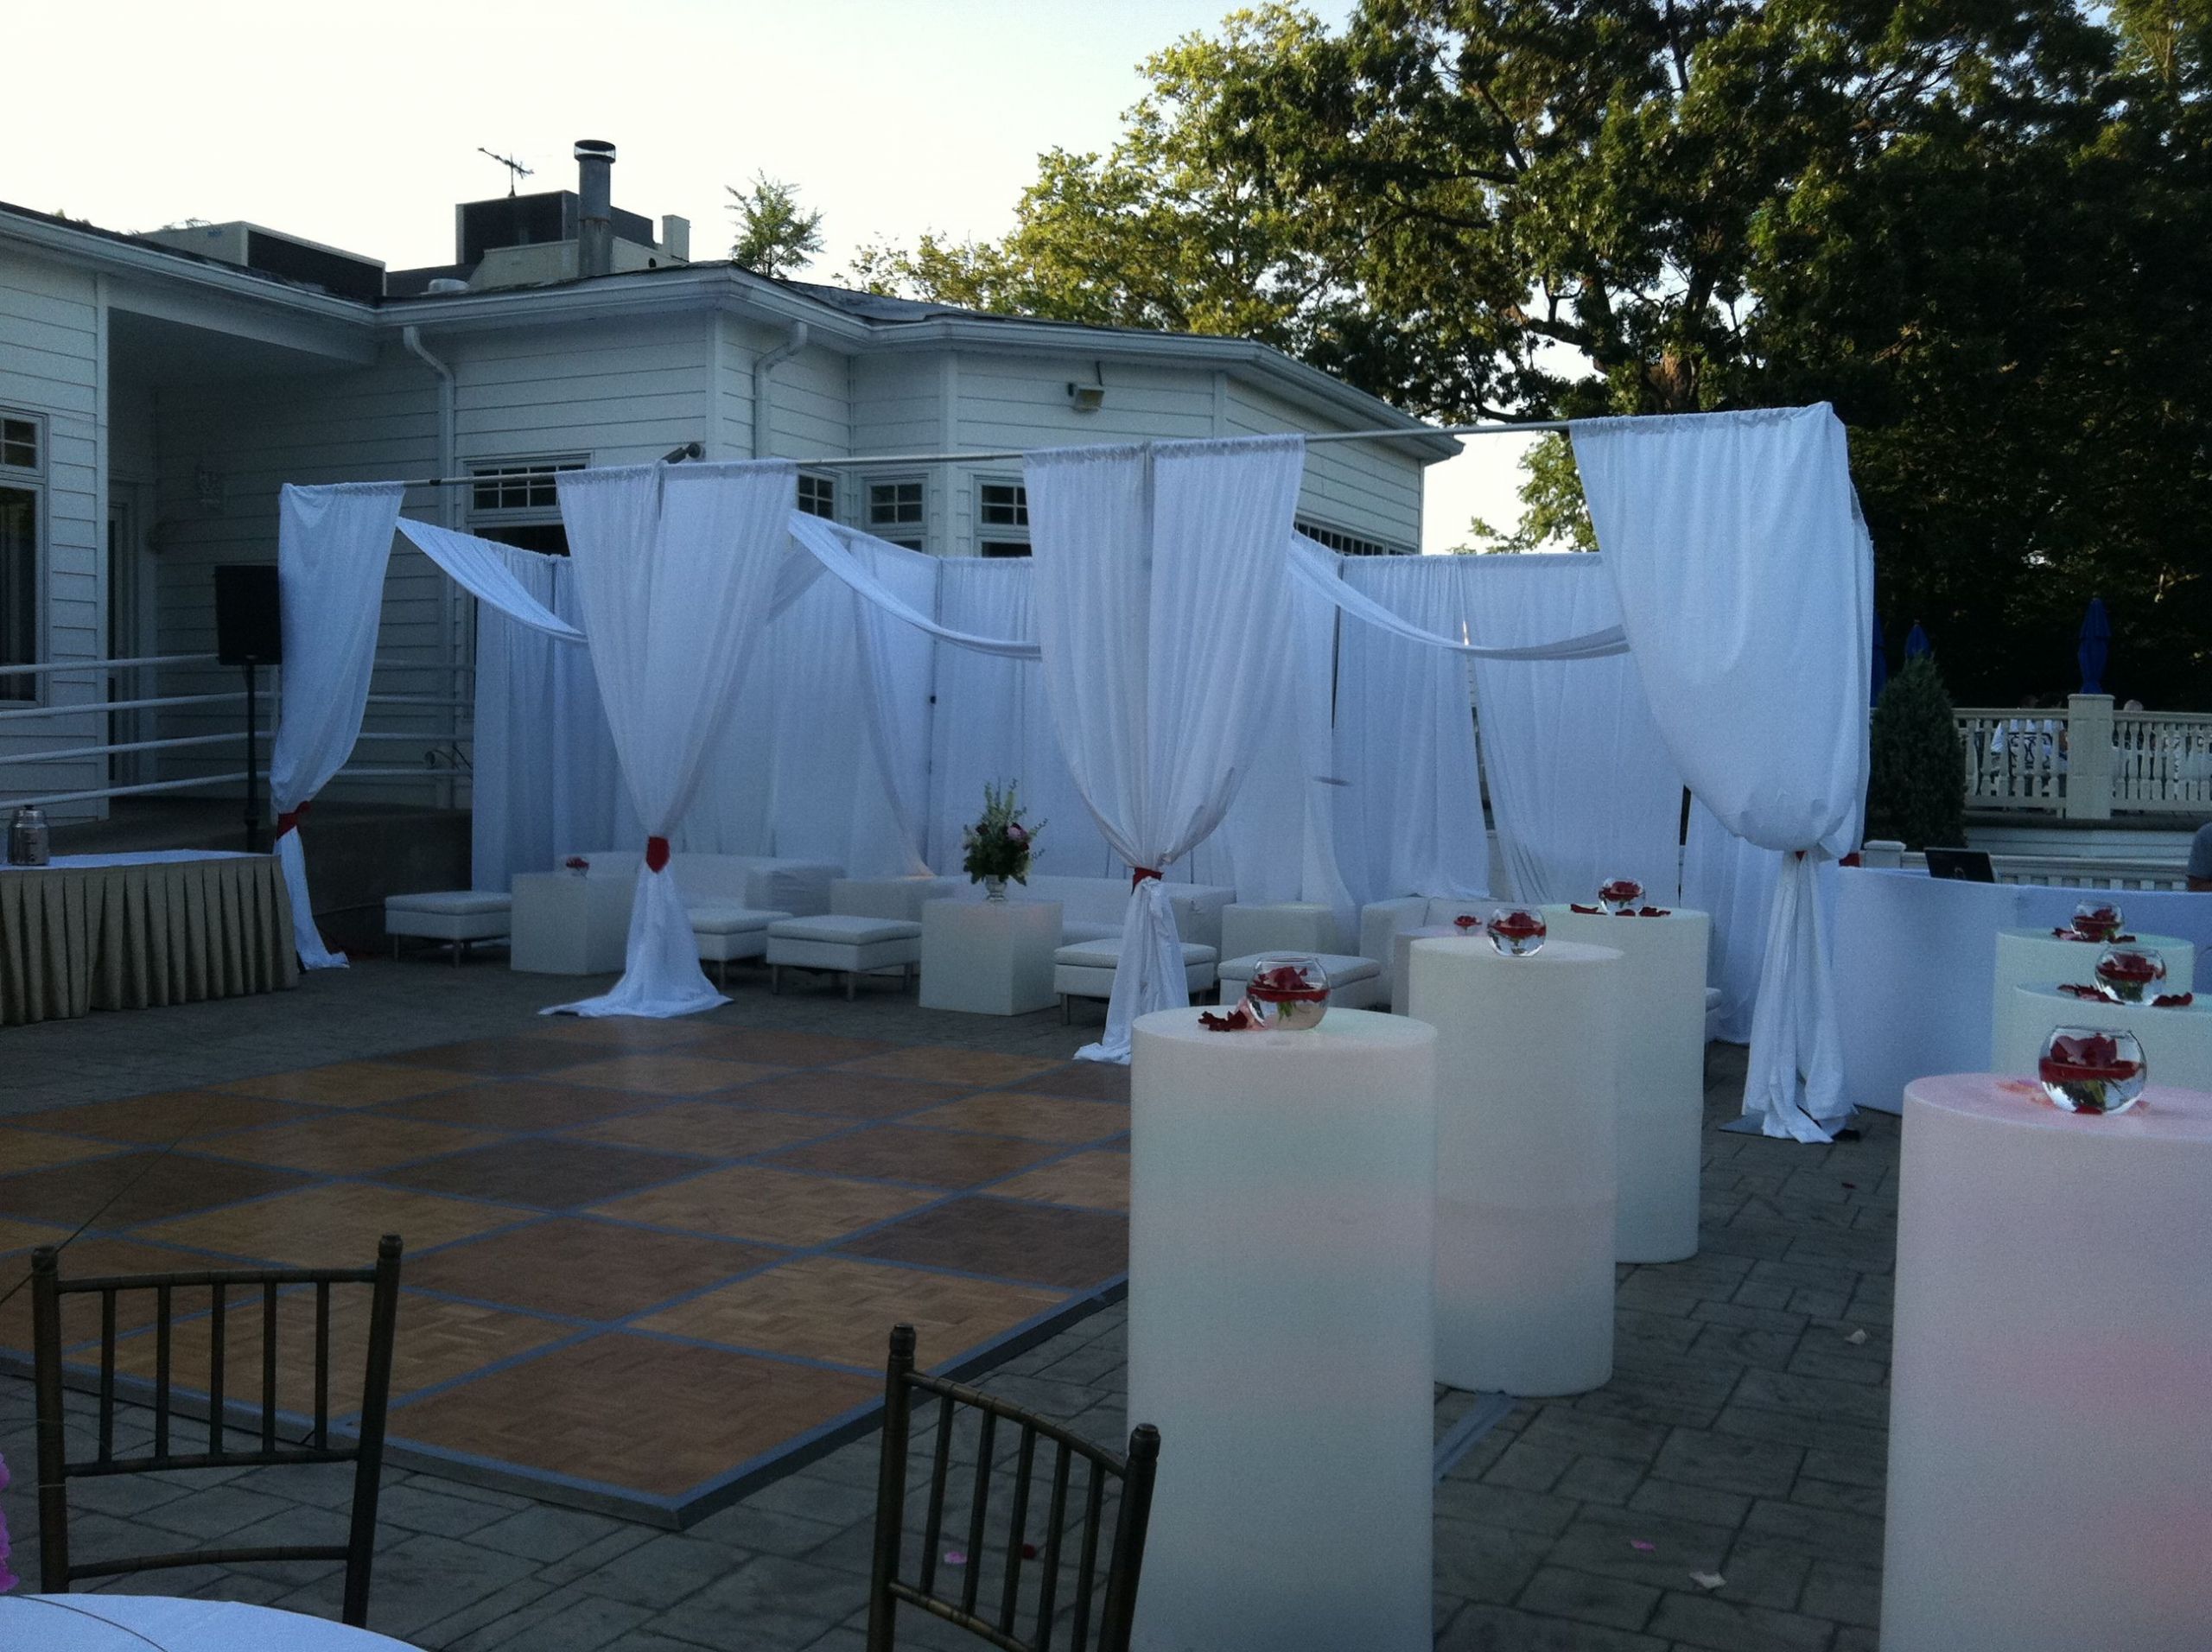 All White Party Ideas Birthday Party
 looking to have an all white party need ideas wanna rent